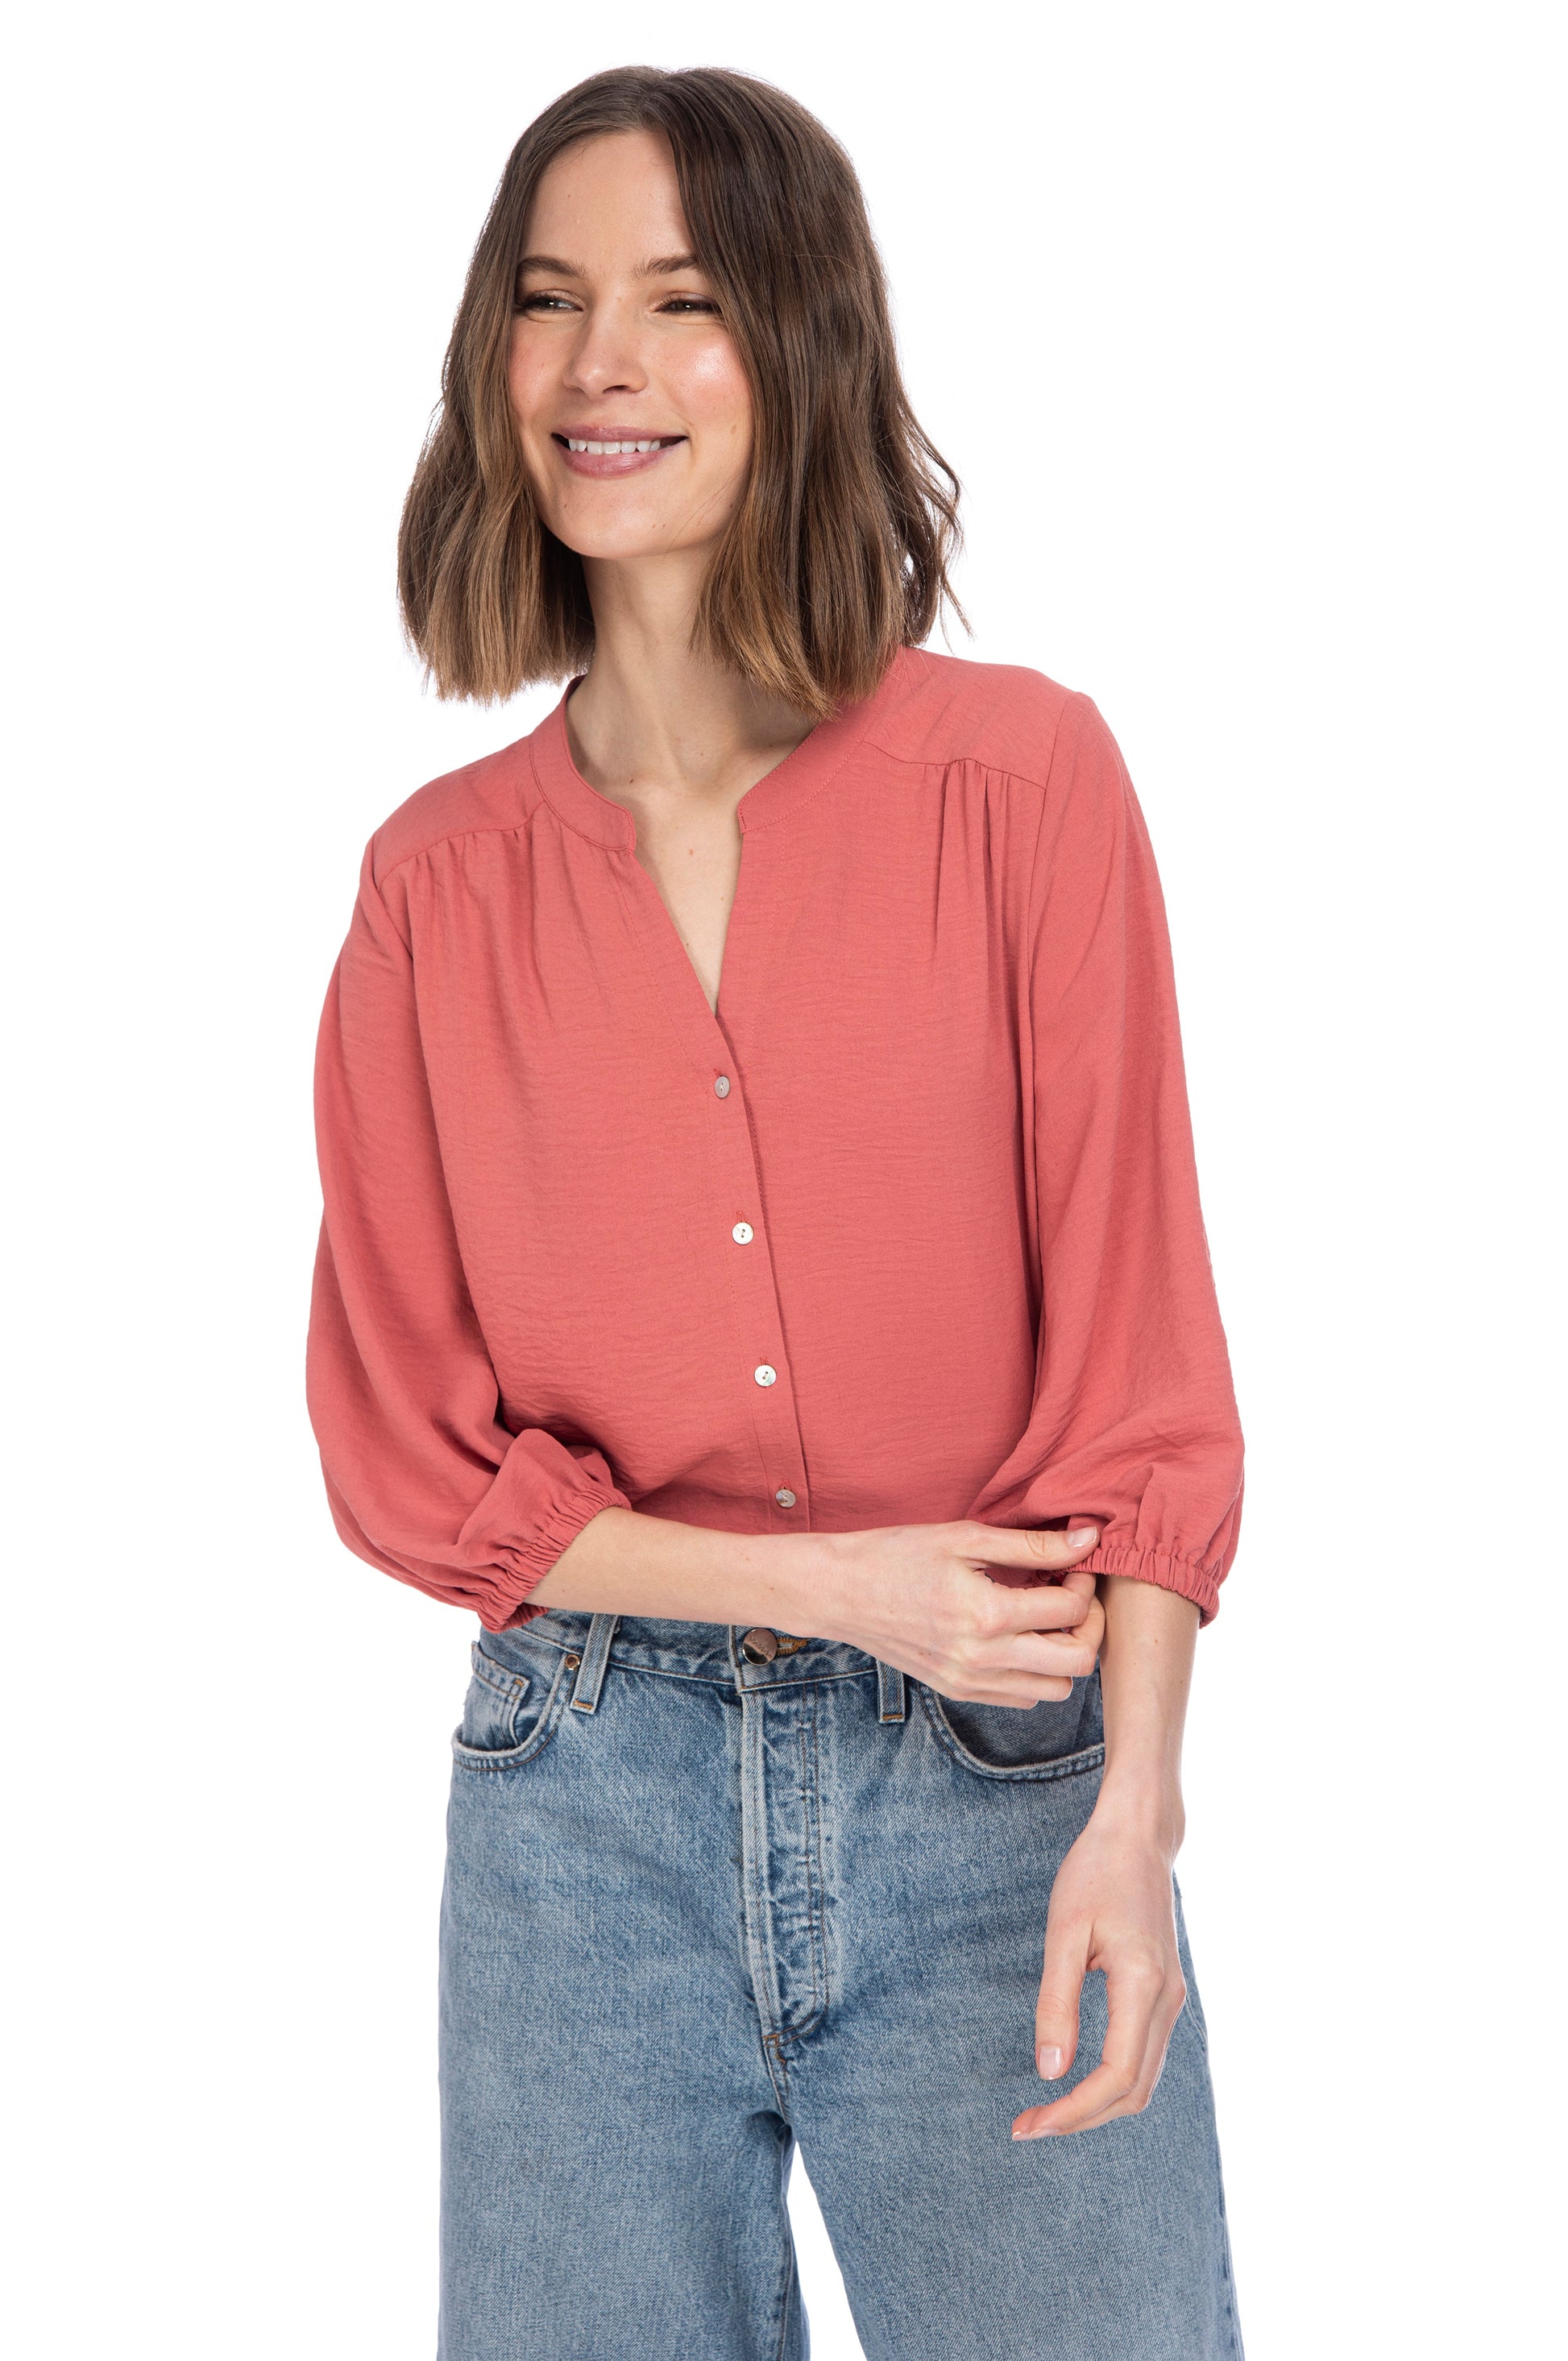 A woman with a subtle smile wearing a B Collection by Bobeau River Button Up Blouse in peach and blue jeans, standing against a white background.